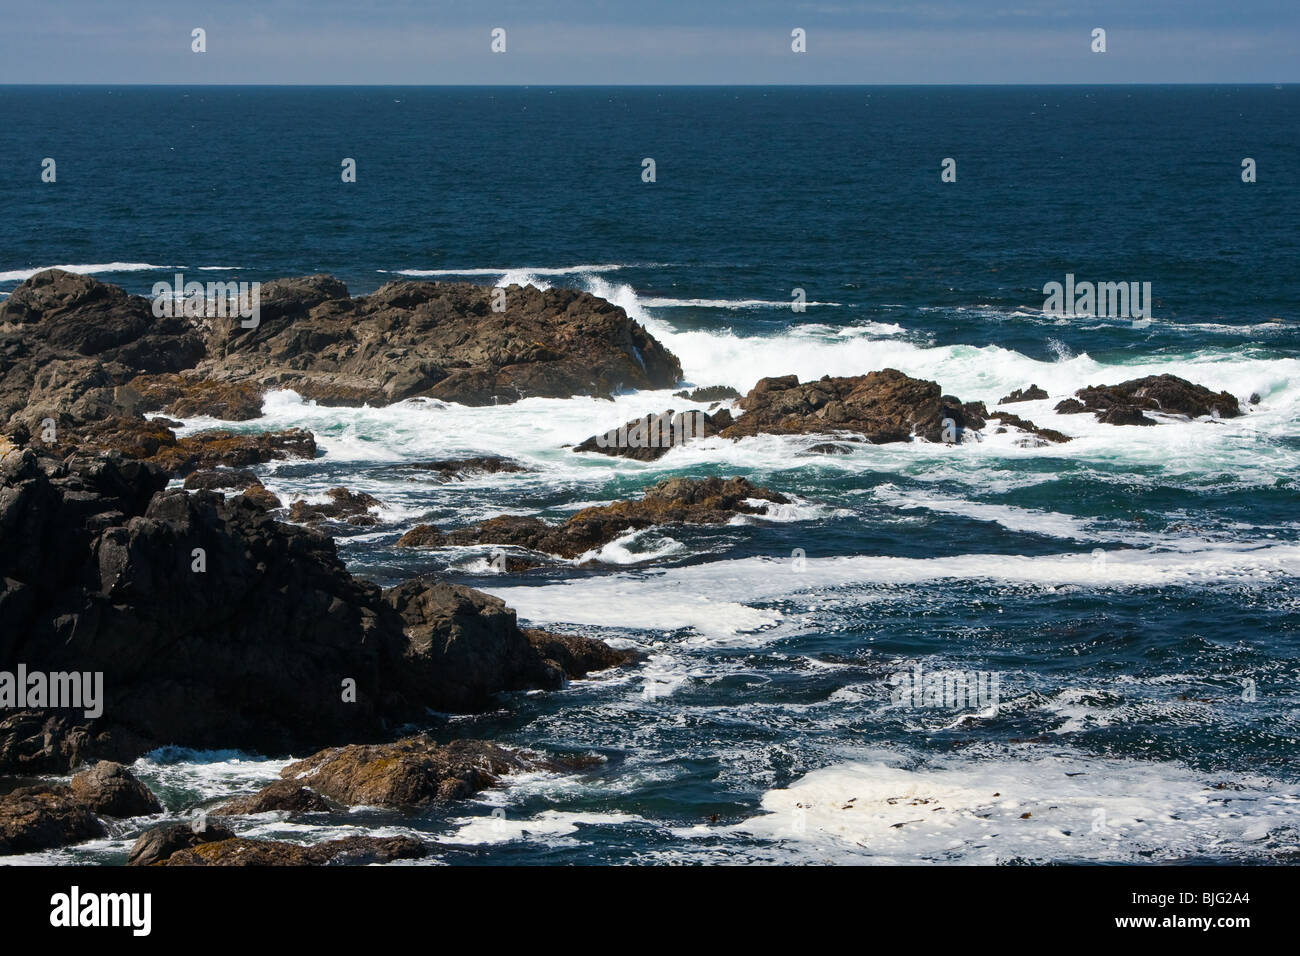 Waves breaking over the rocky coast of Vancouver Island, British Columbia Stock Photo